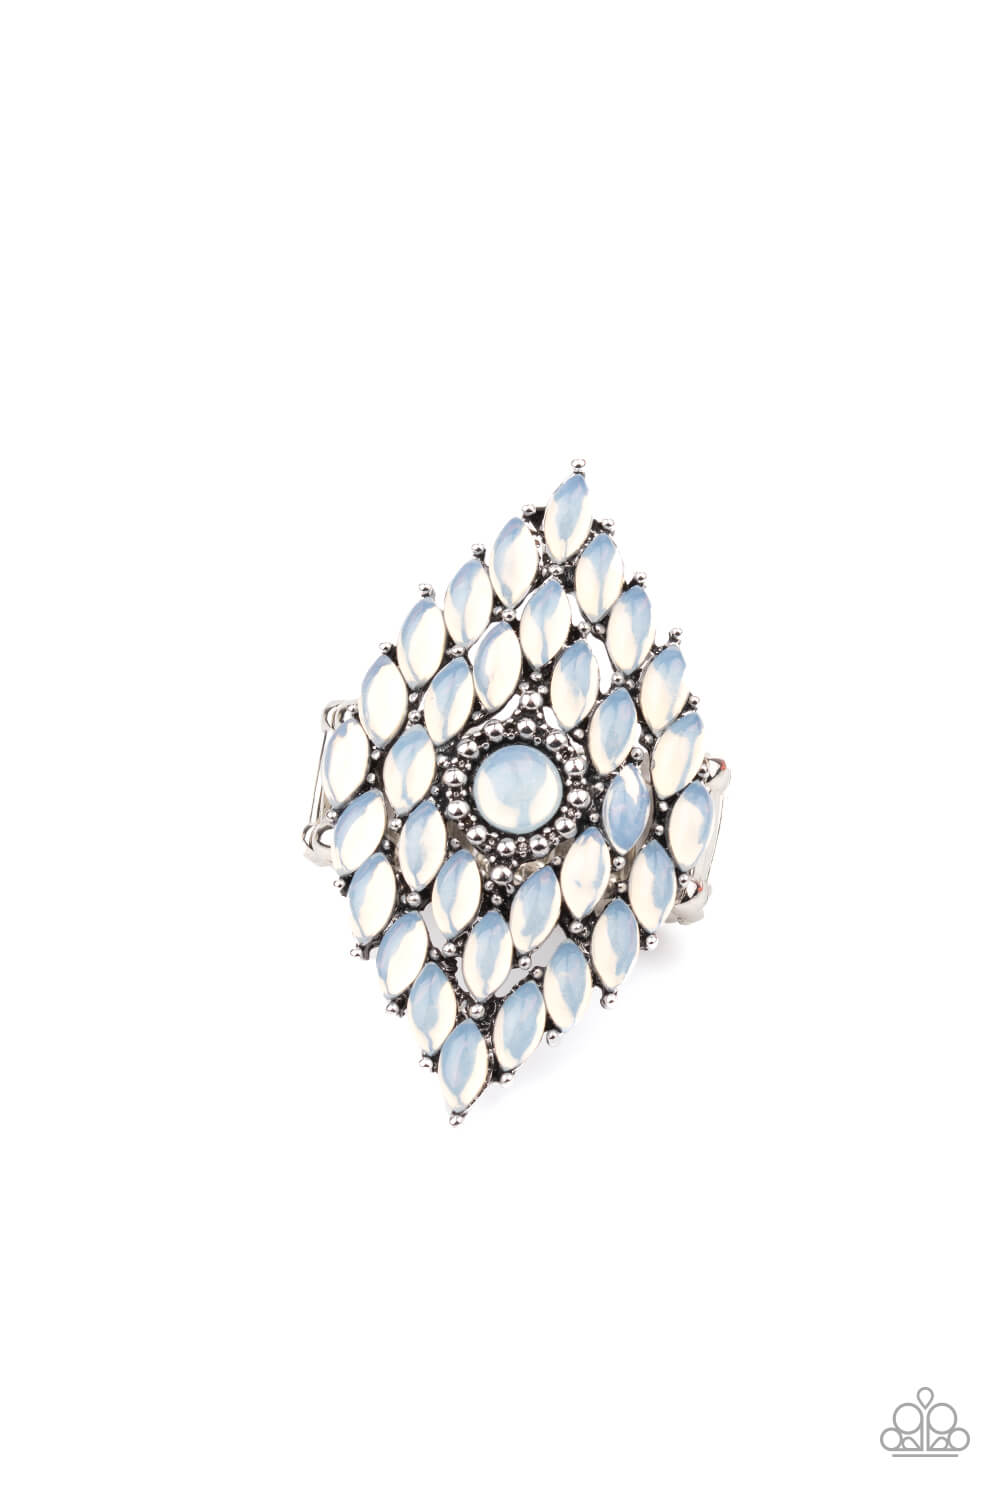 Incandescently Irresistible White Ring June Life of the Party Exclusive - Princess Glam Shop